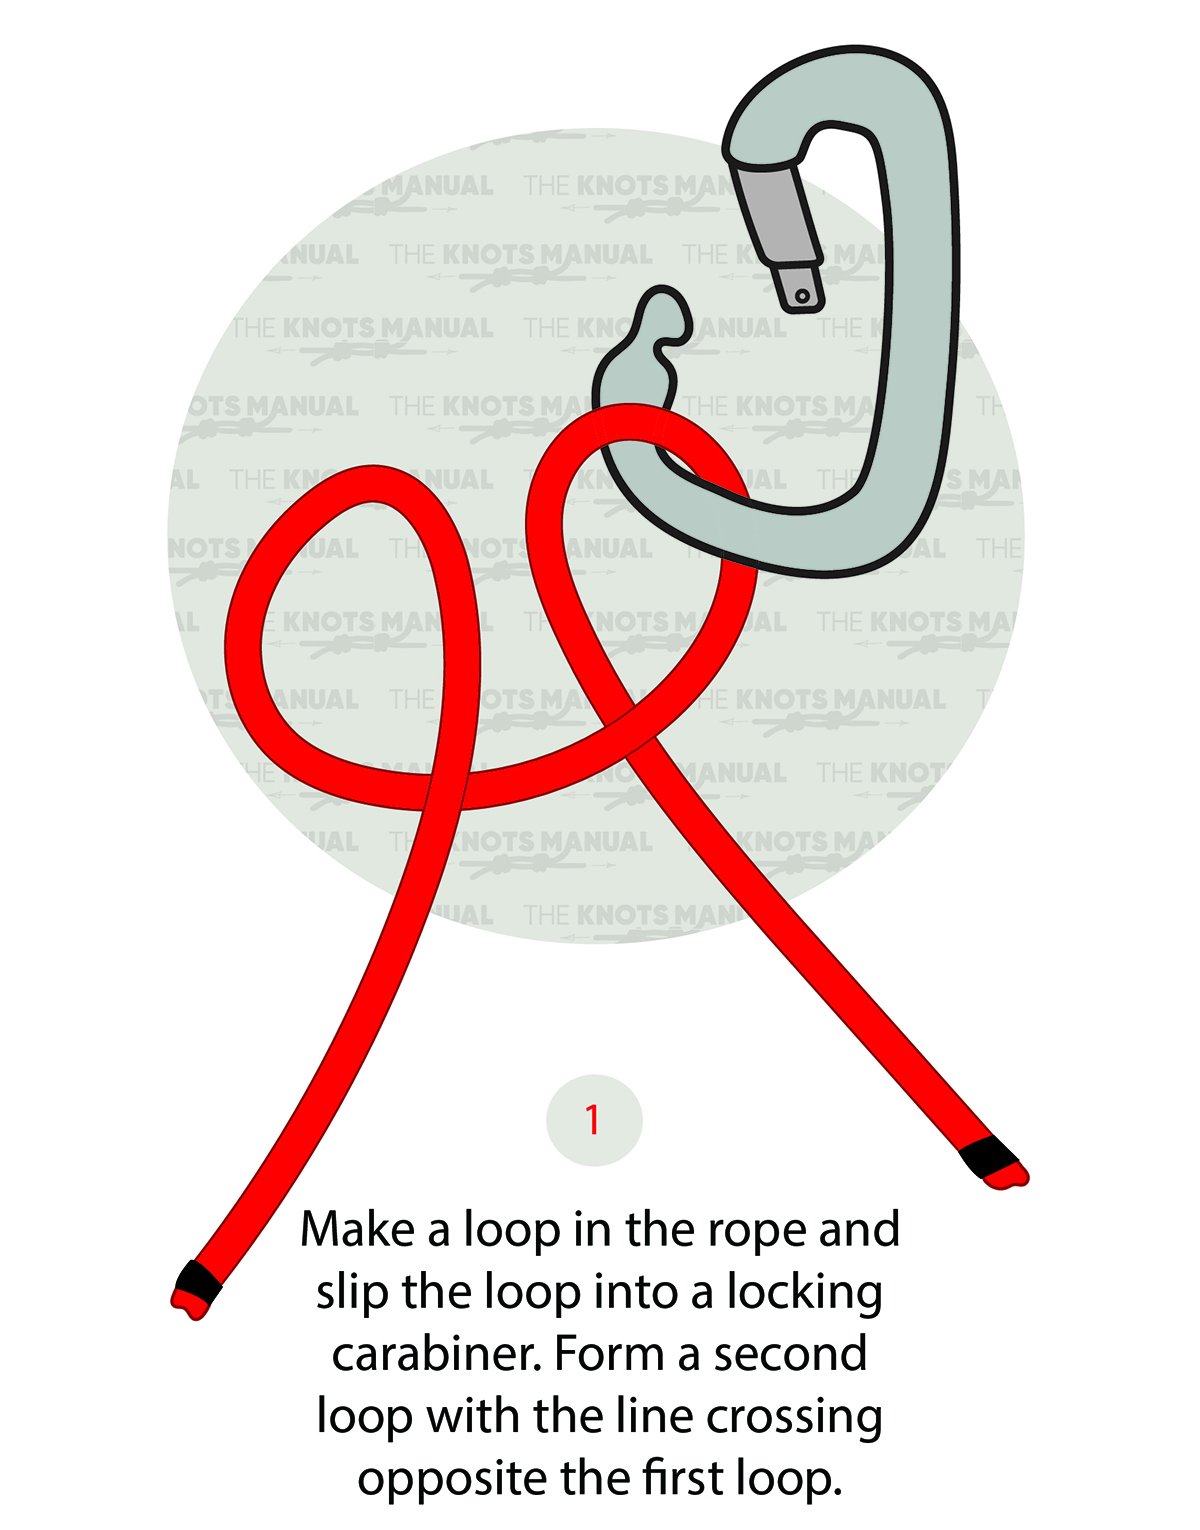 How To Tie A Munter (Italian) Hitch Knot: Illustrated Guide